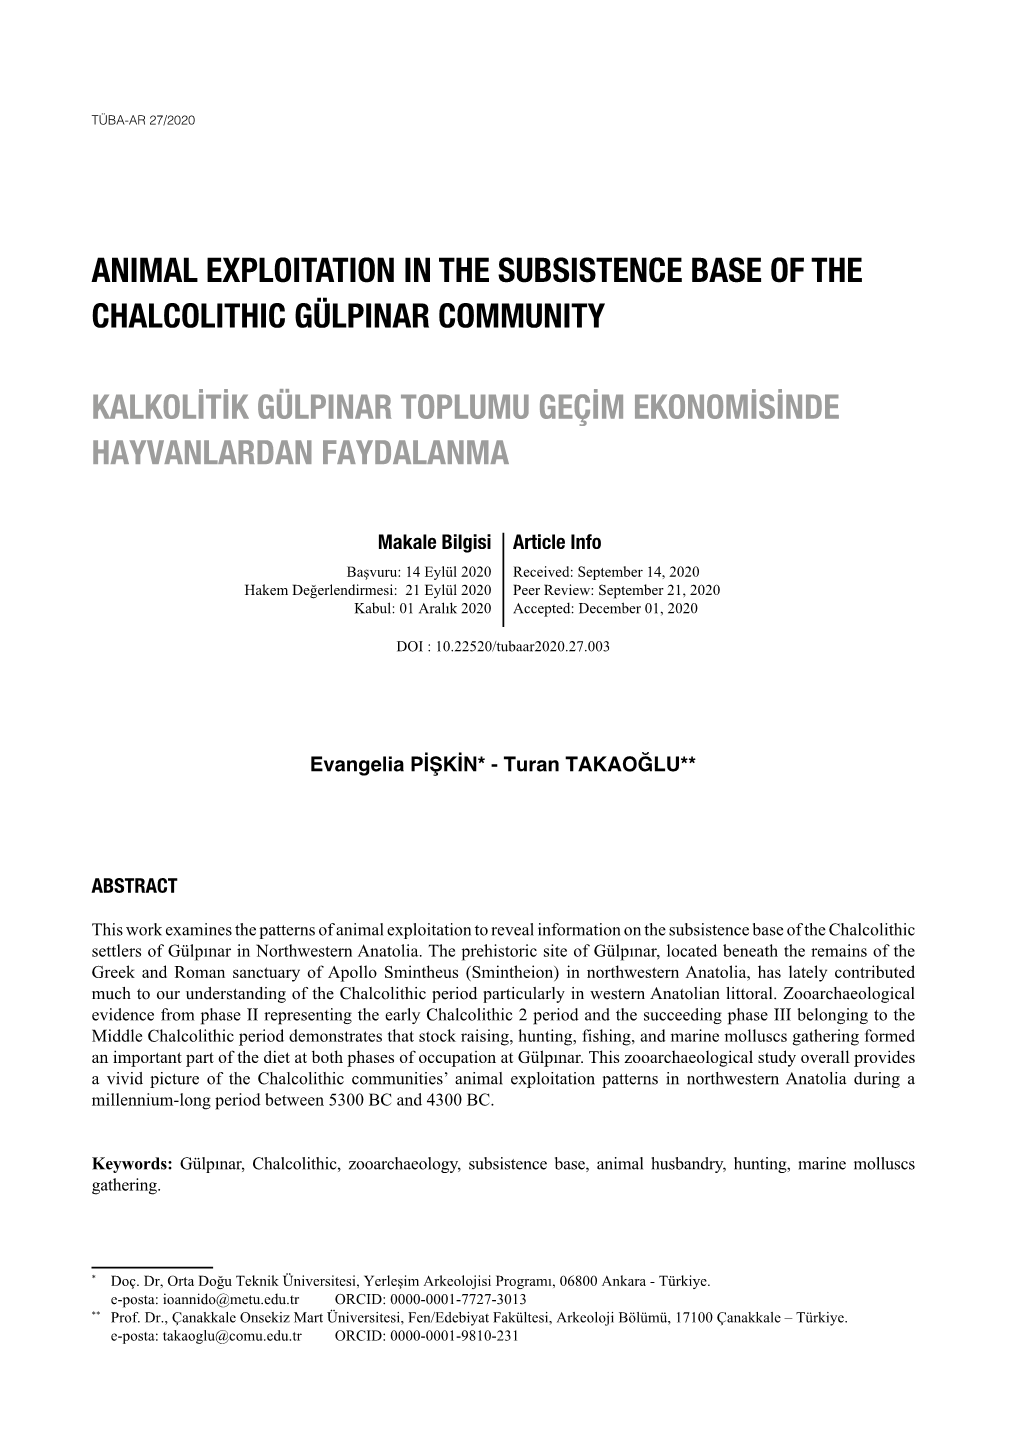 Animal Exploitation in the Subsistence Base of the Chalcolithic Gülpinar Community